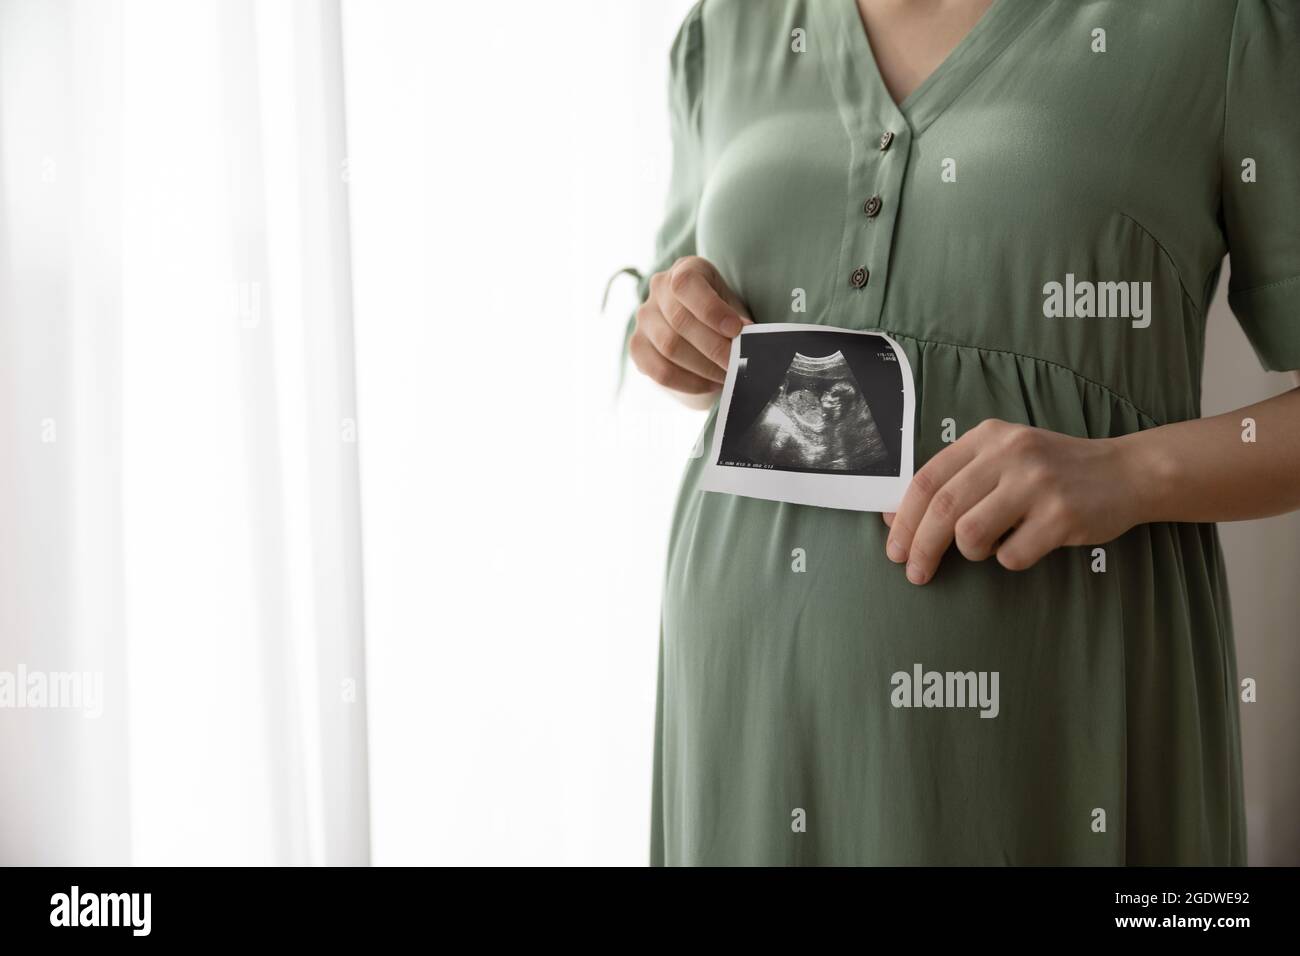 Pregnant woman showing unborn baby sonogram image at camera Stock Photo